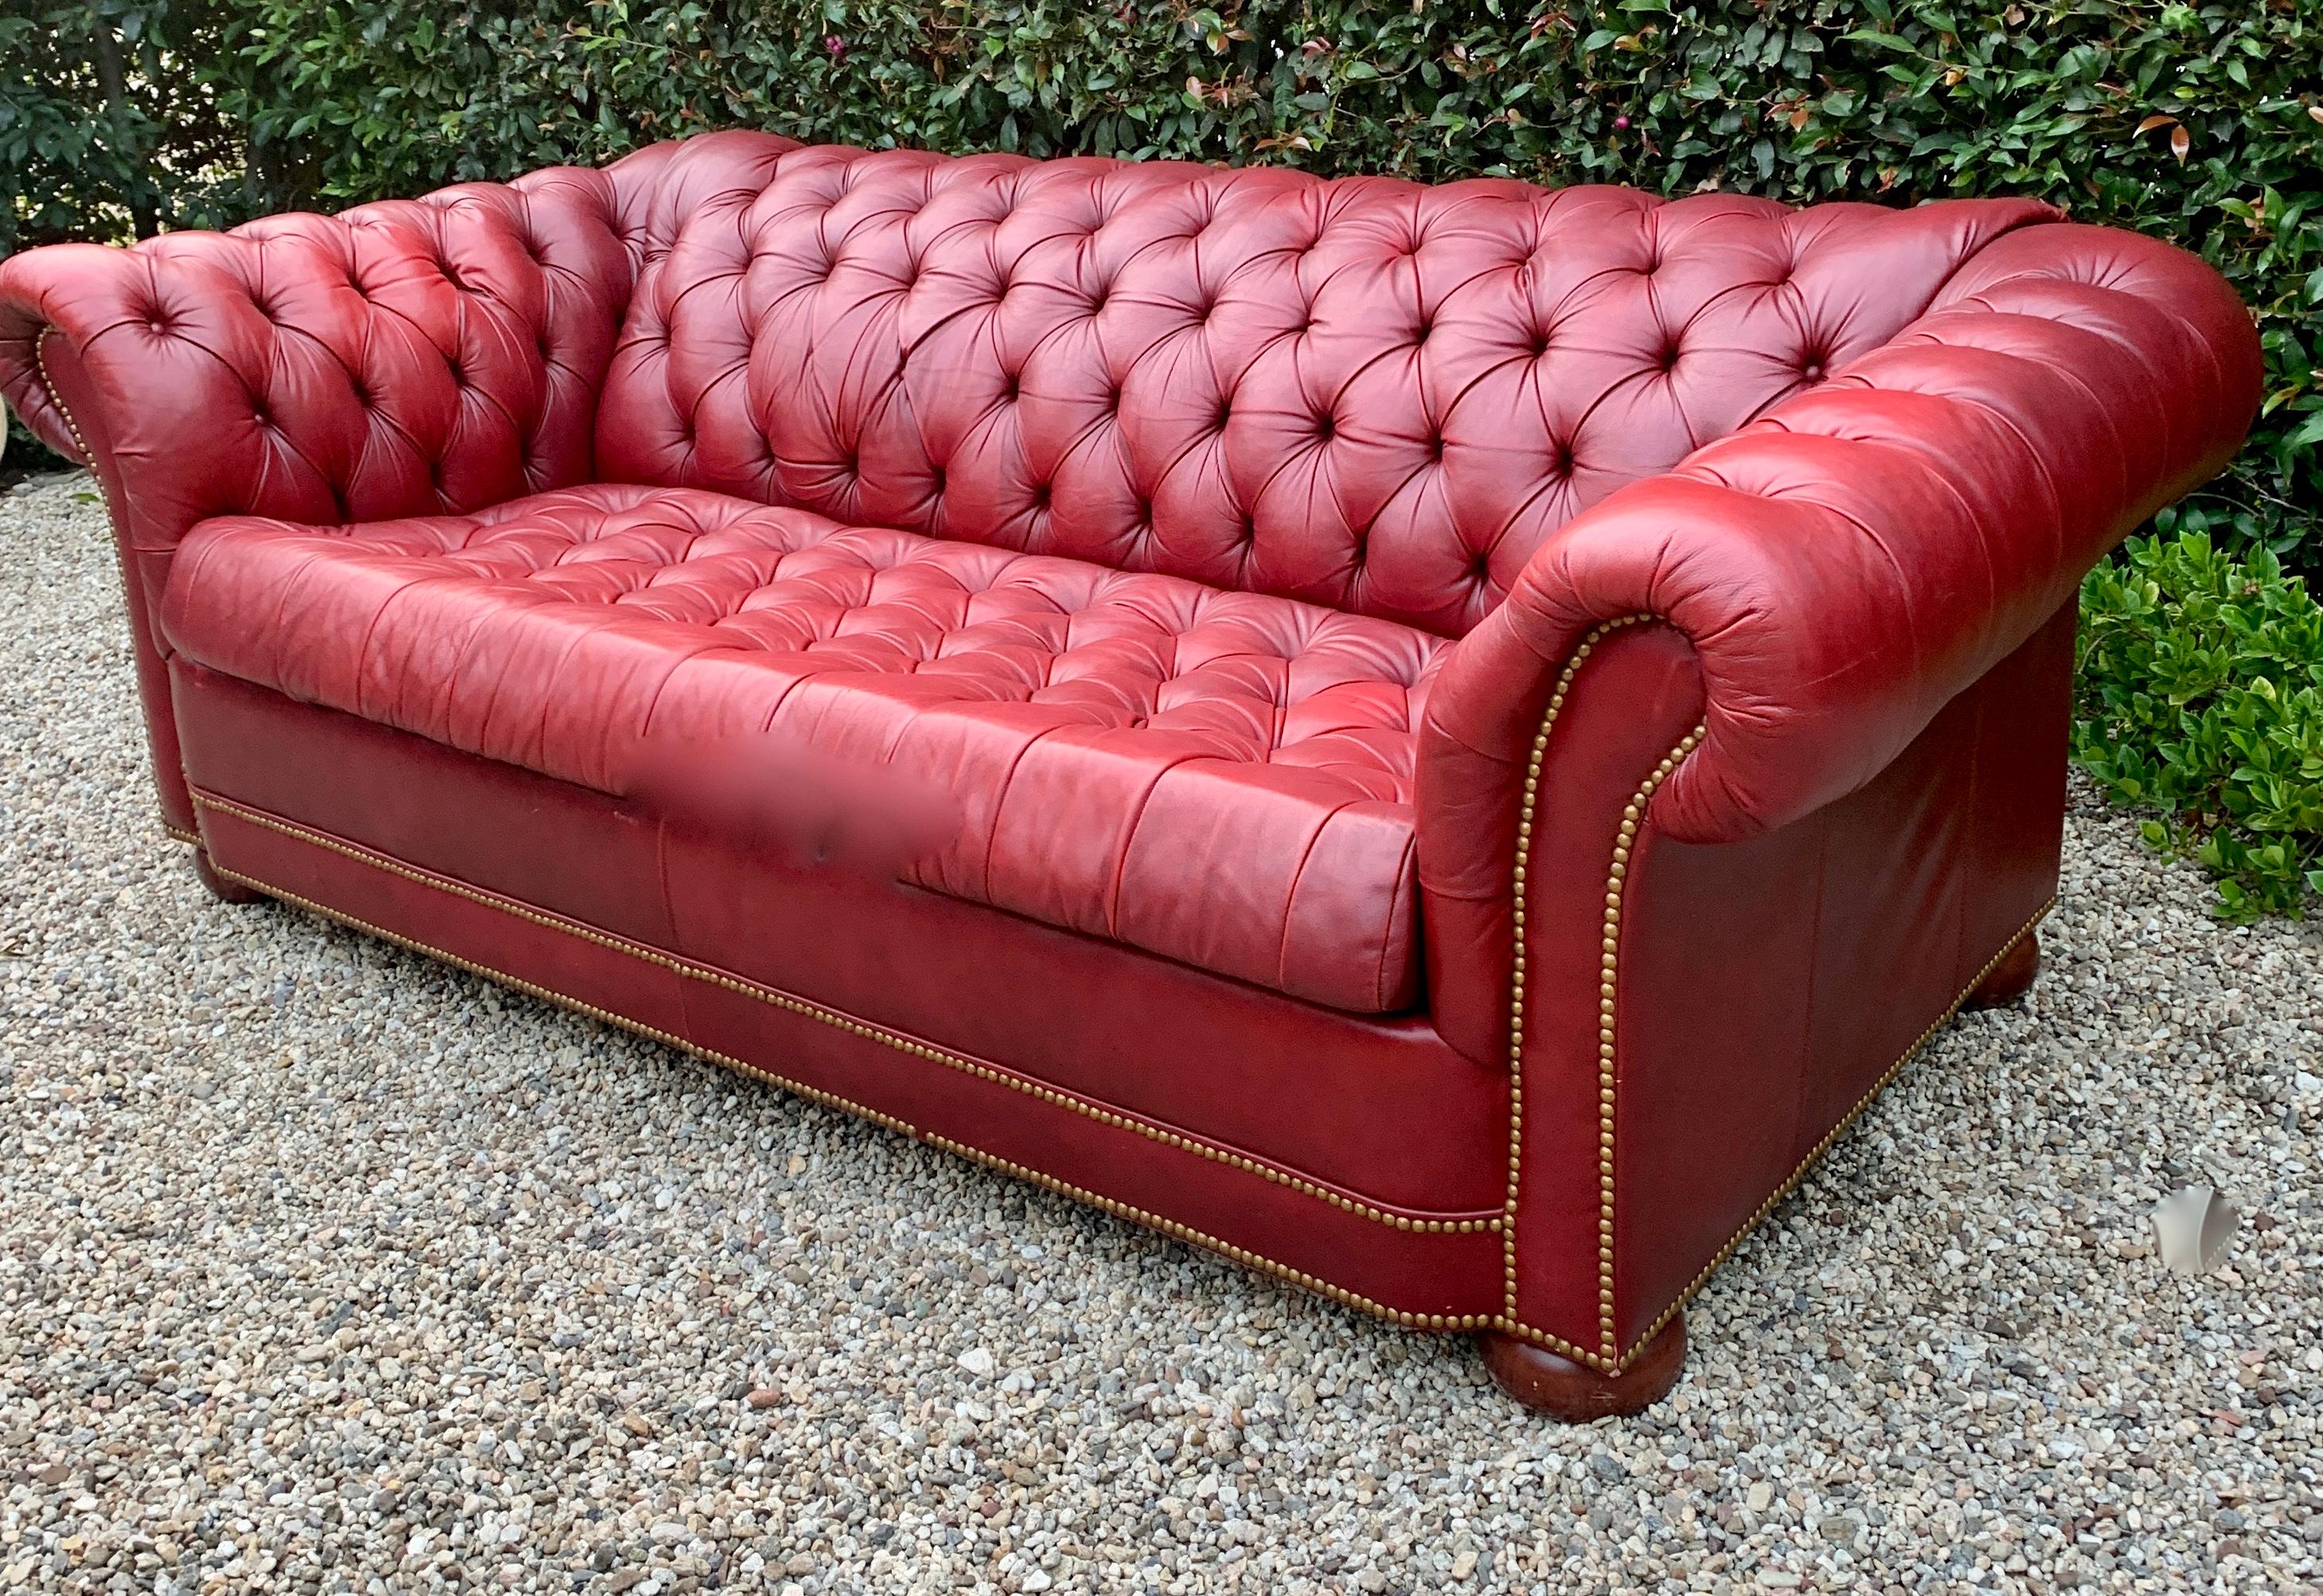 Red leather chesterfield sleeper sofa - 

Rare to find, pull-out, sleeper sofa in the sophisticated chesterfield style. A compliment to any living area, and especially a room designated for guests or guest room. The leather is wonderfully